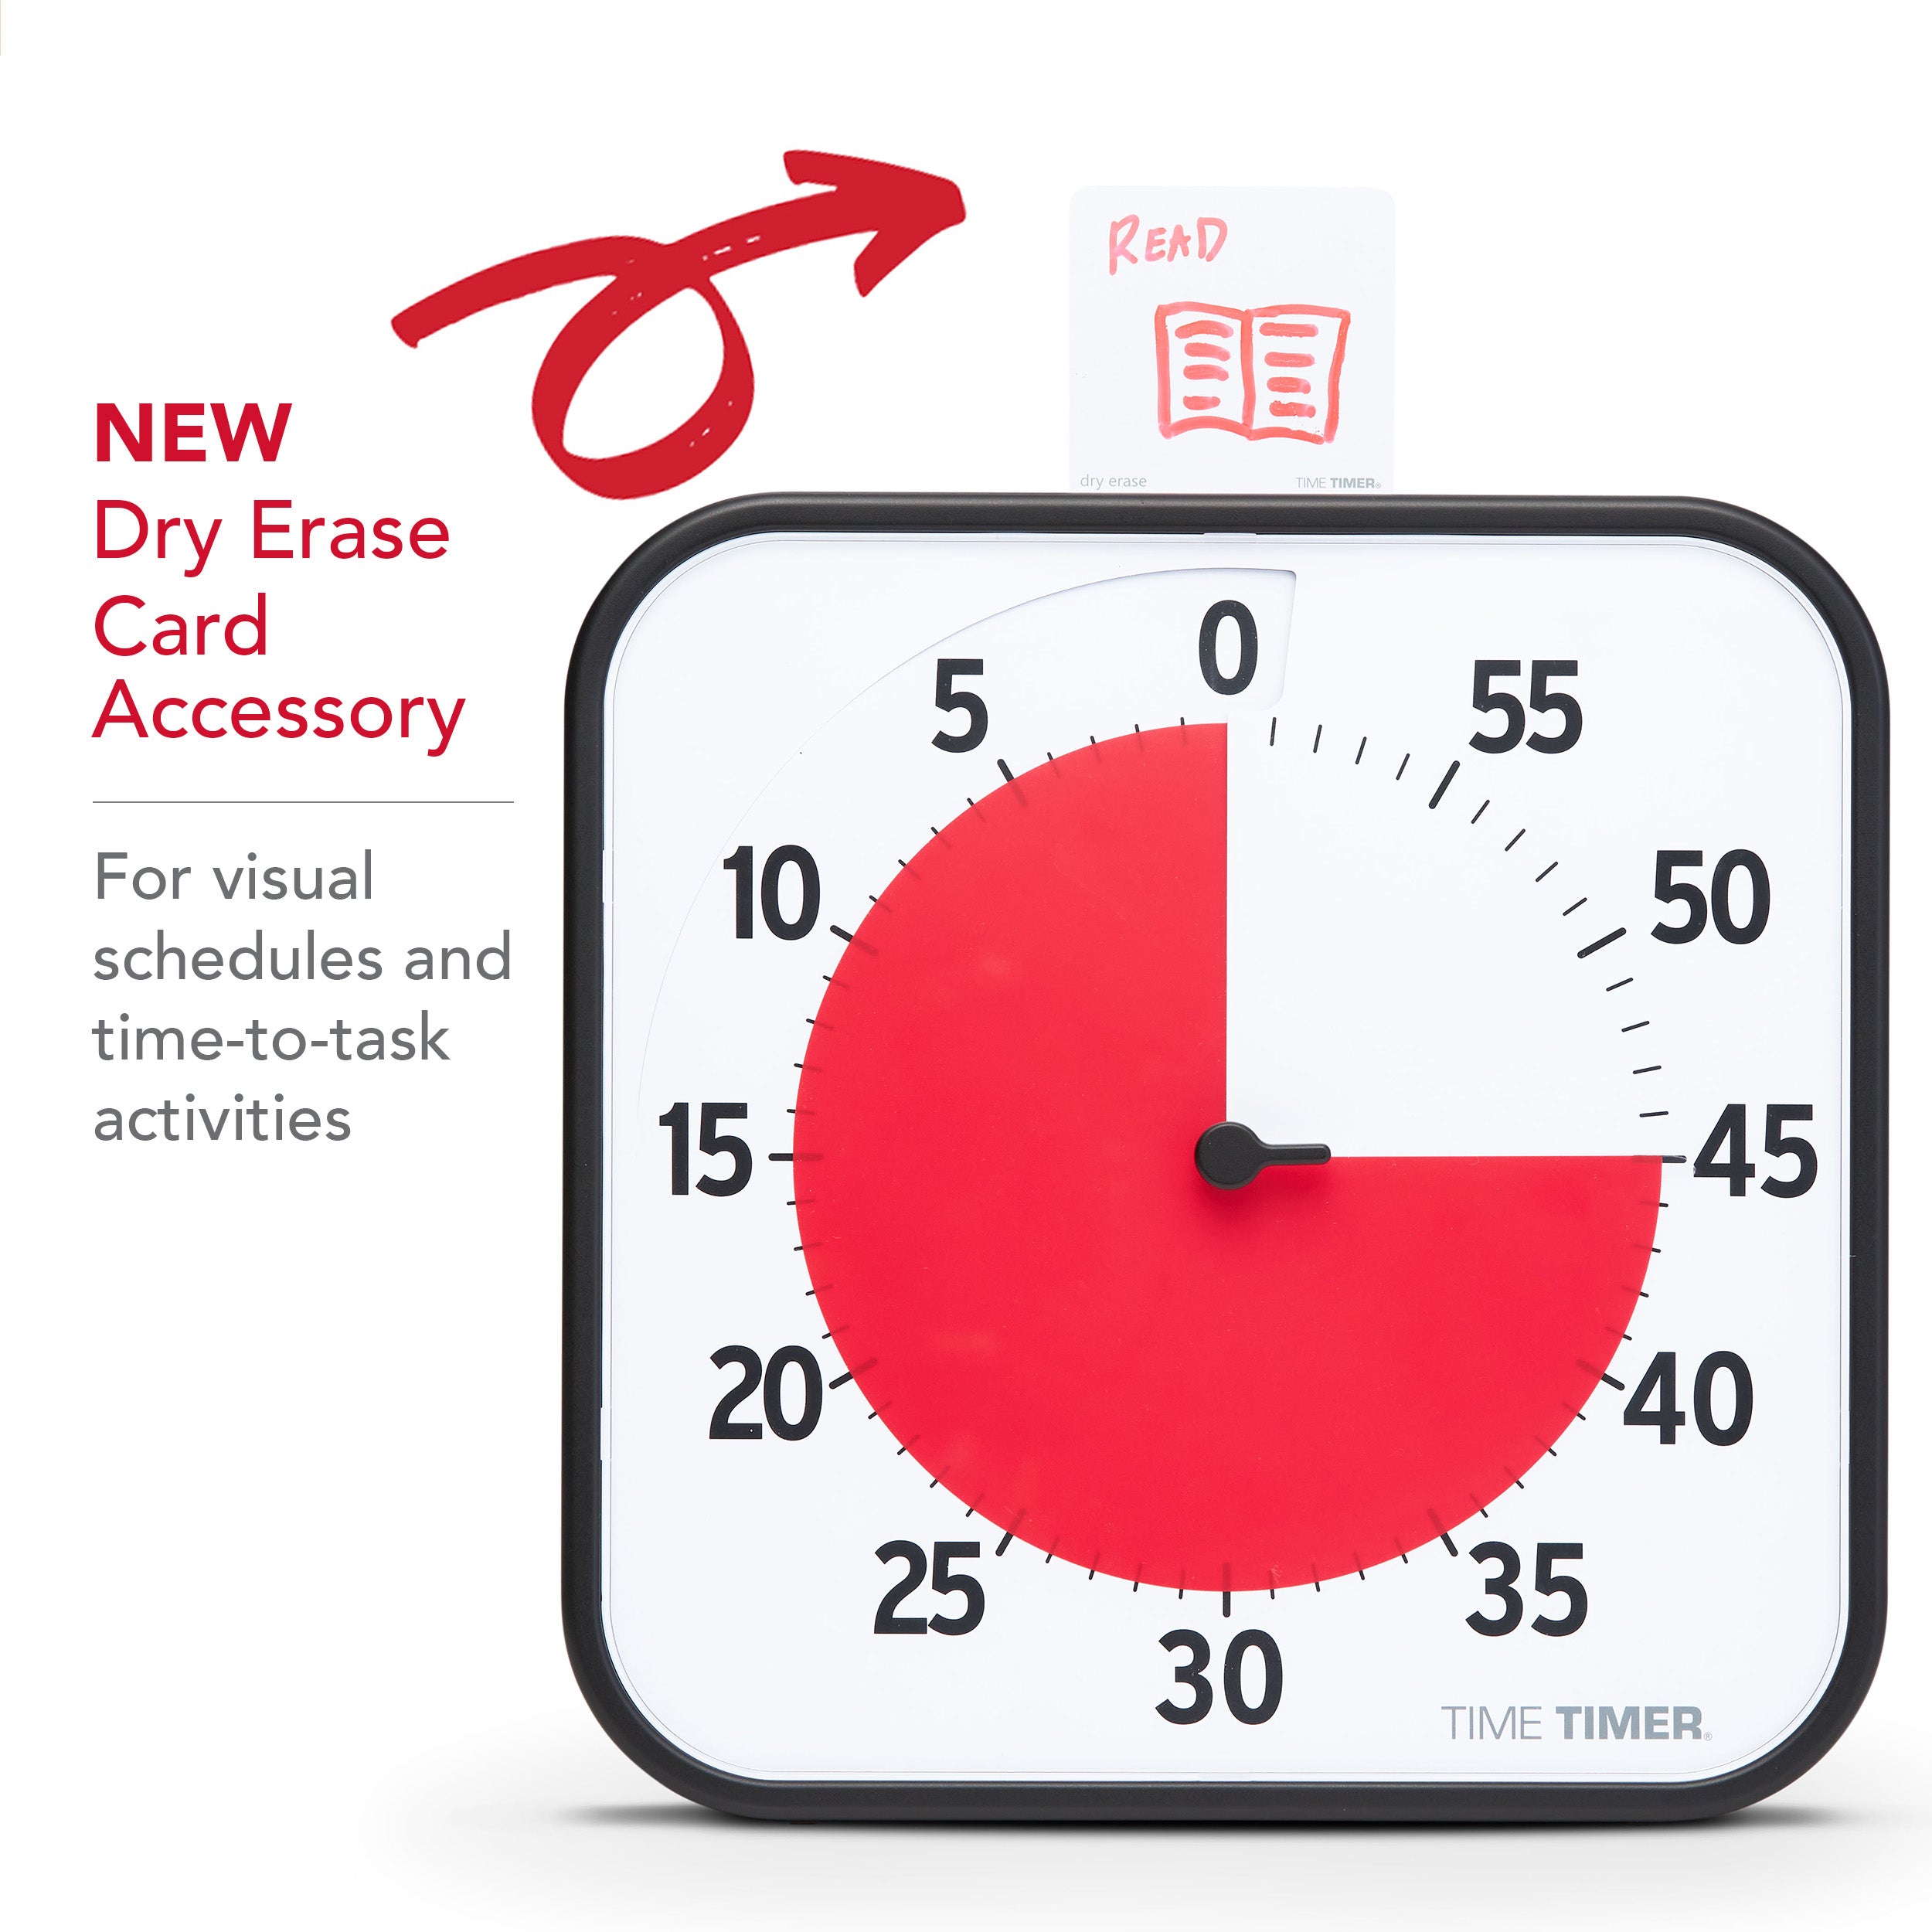 The Time Timer Original 12" comes with a Dry Erase Card Accessory. This accessory slots into the top of the 60-minute visual timer so that the user can create time-to-task activities or visual schedules. This image shows the word "Read" and a drawing of a book on the Dry Erase Card. 